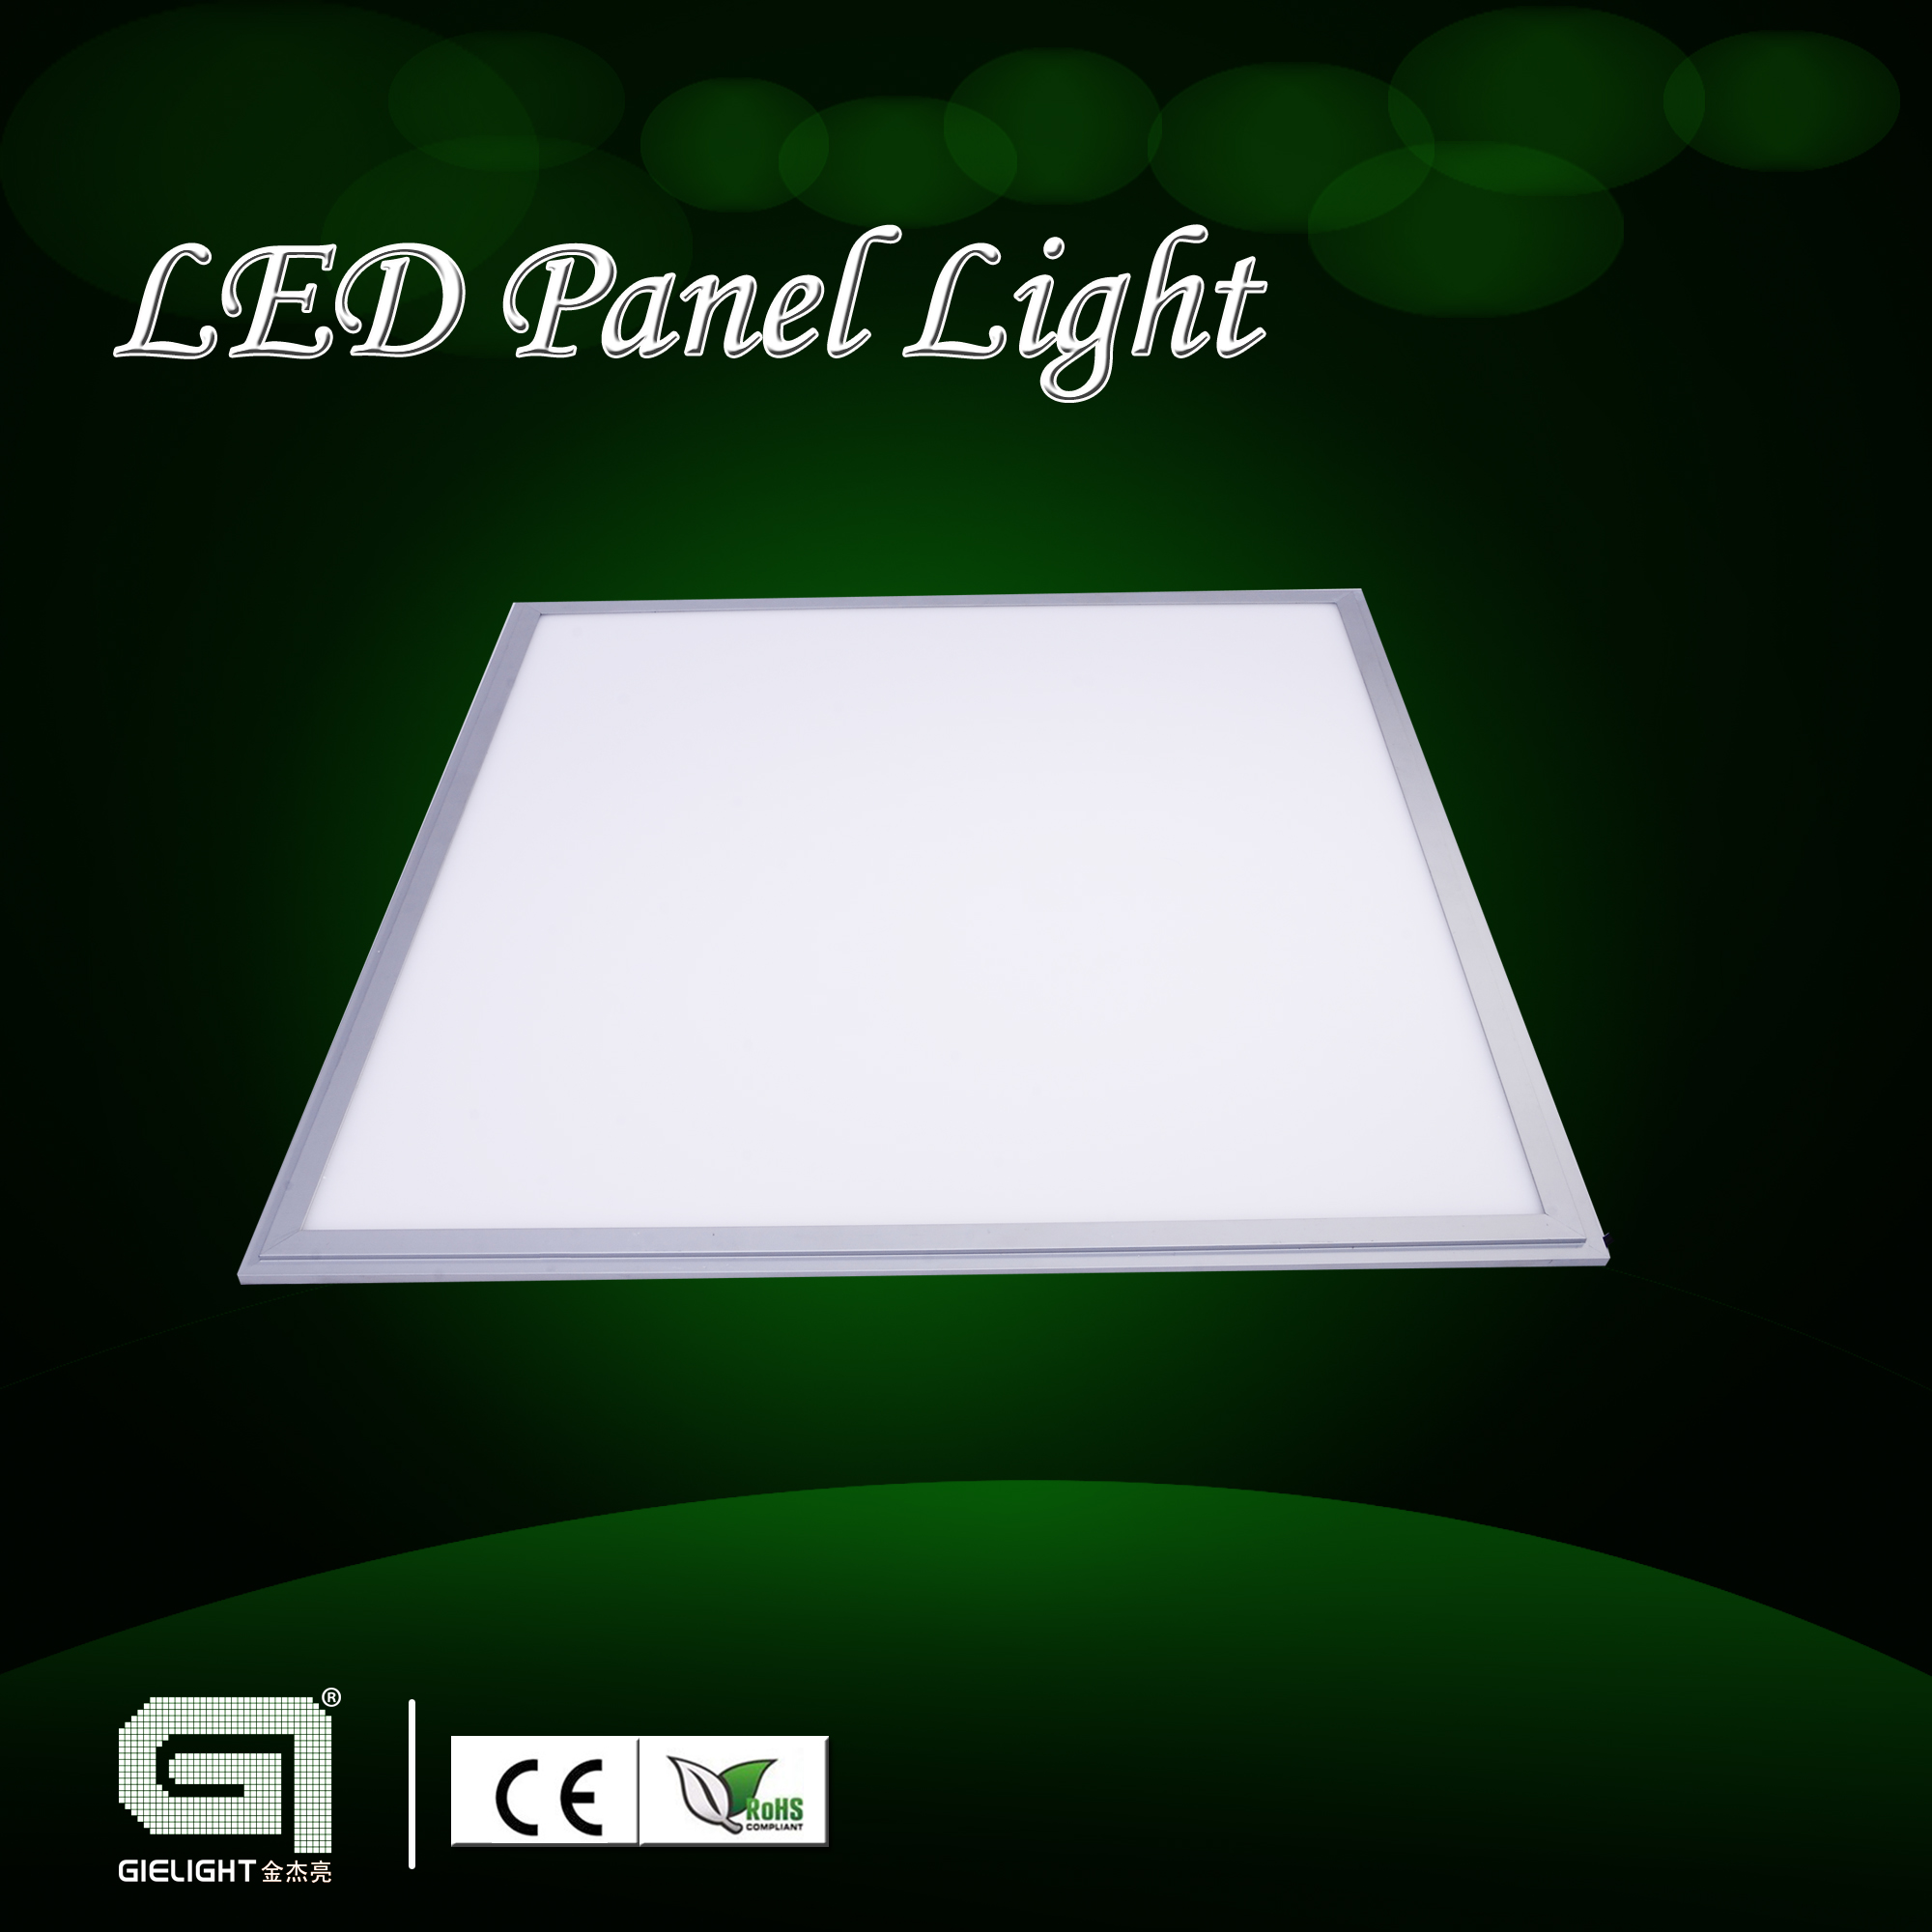 $22.5 top sales led light panel 60*60cm 36w recessed, suspended, mounted, office light